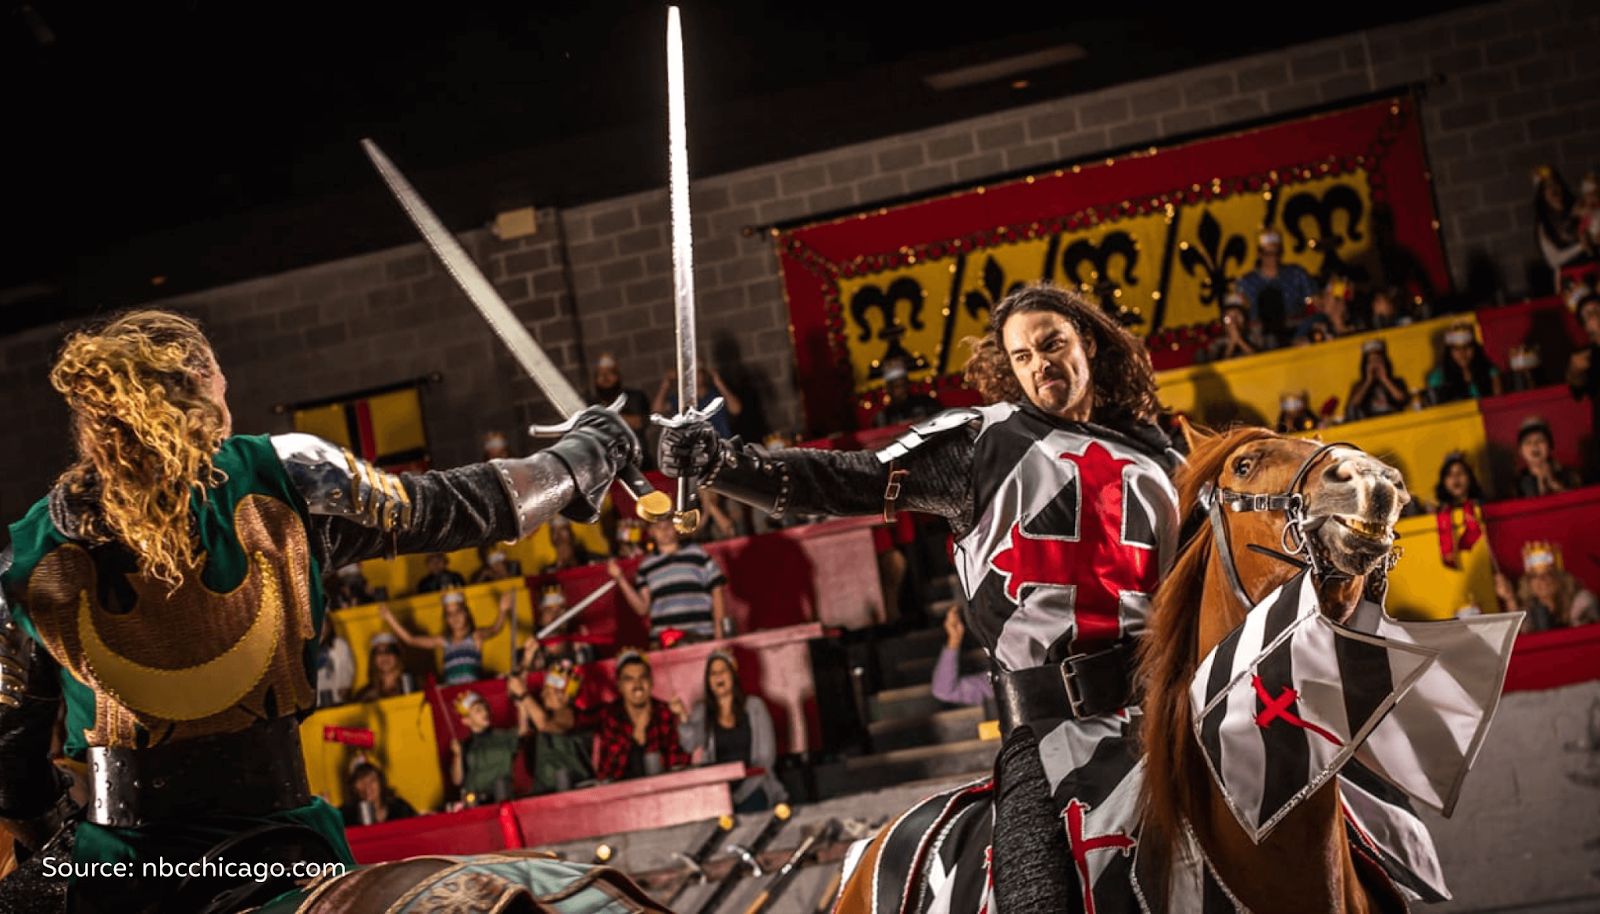 Illustration of sword fighting at Medieval Times